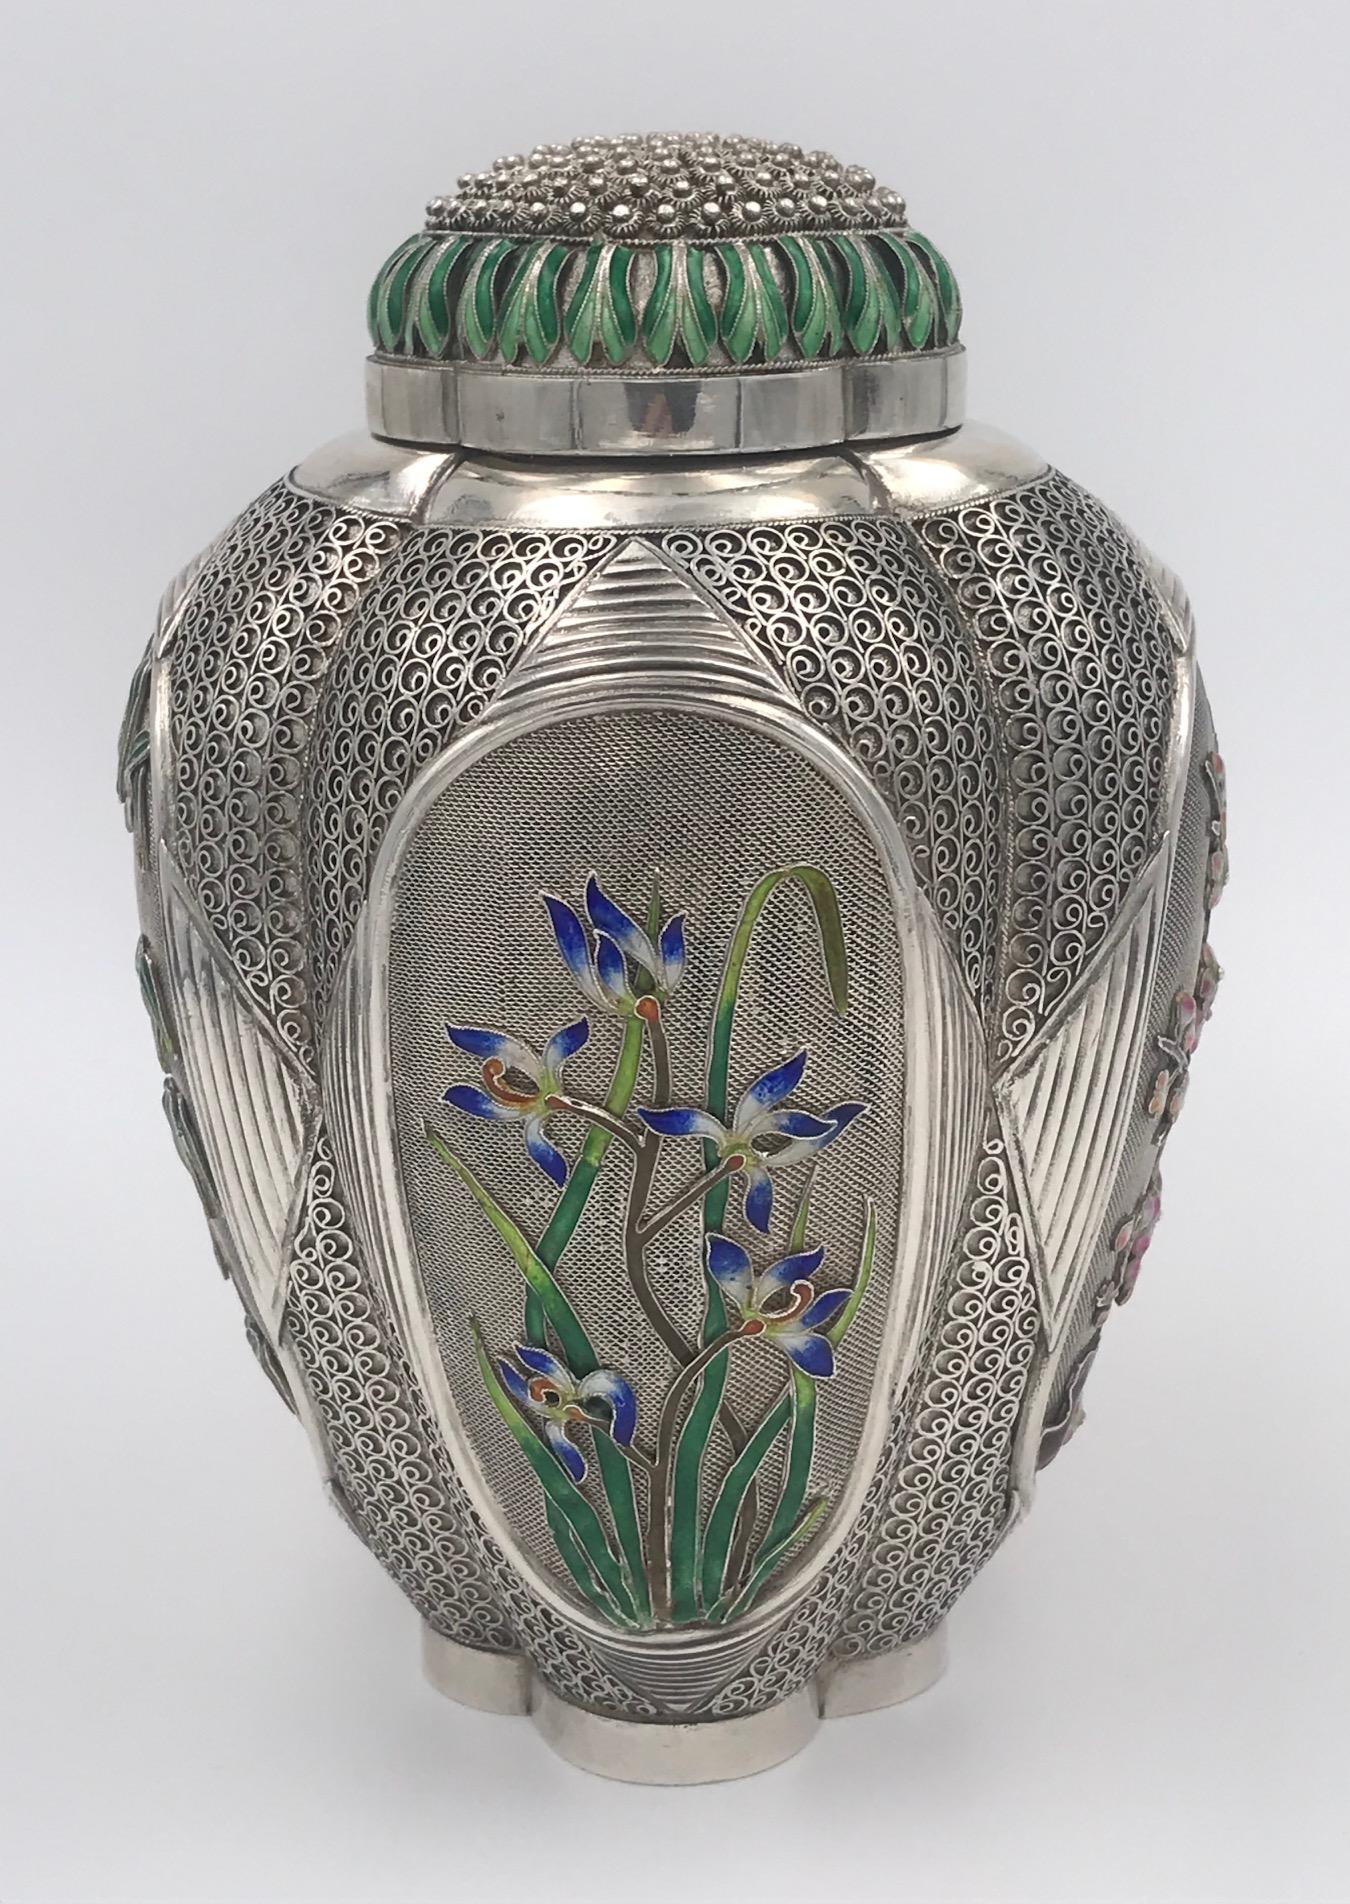 A beautifully decorated Chinese silver tea caddy with four enameled floral panels and further enamel to the pull-off lid.
The caddy is unmarked and dates from mid-20th century.